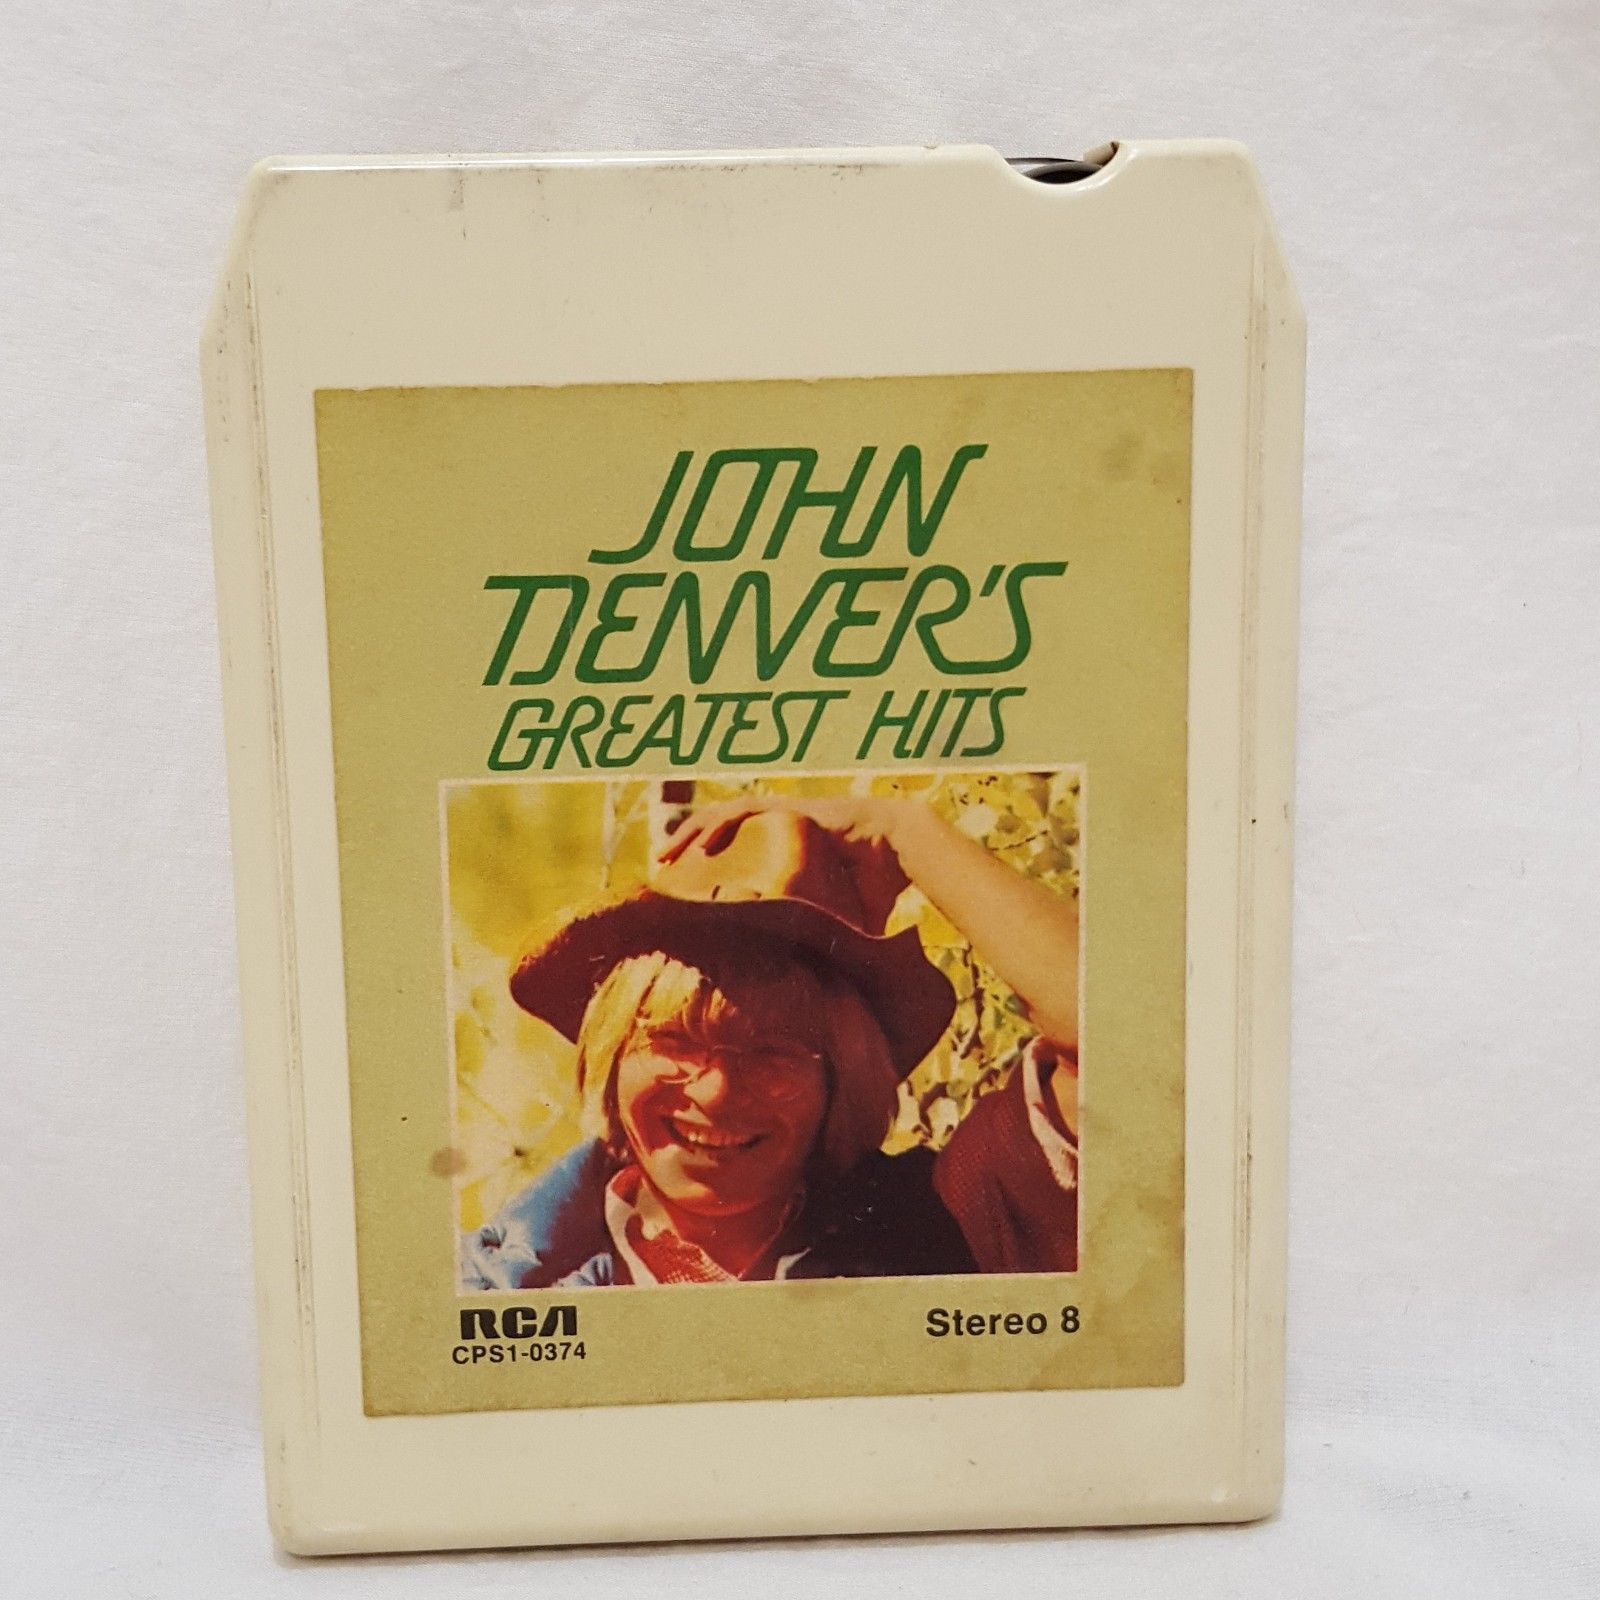 Primary image for John Denver's Greatest Hits 8 Track Cartridge Tape RCA CPS1 0374